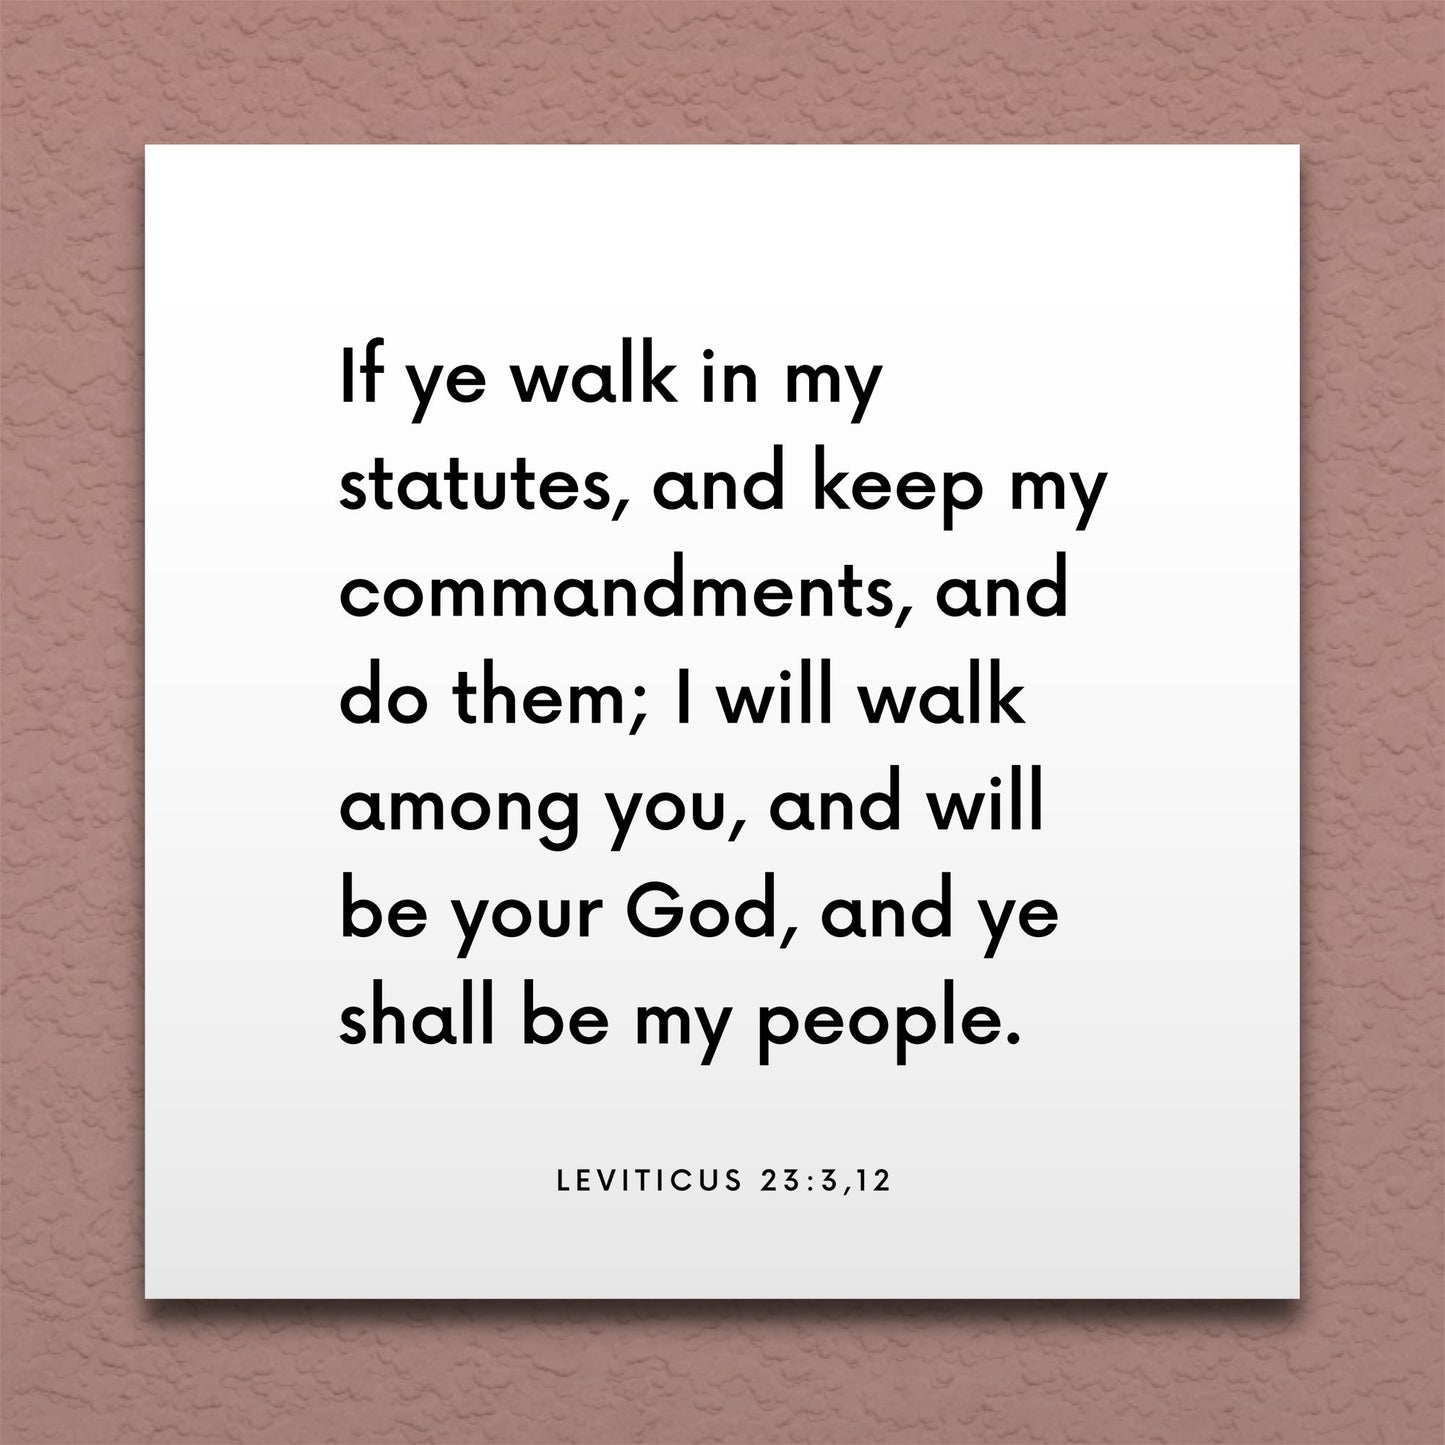 Wall-mounted scripture tile for Leviticus 23:3,12 - "I will walk among you, and will be your God"